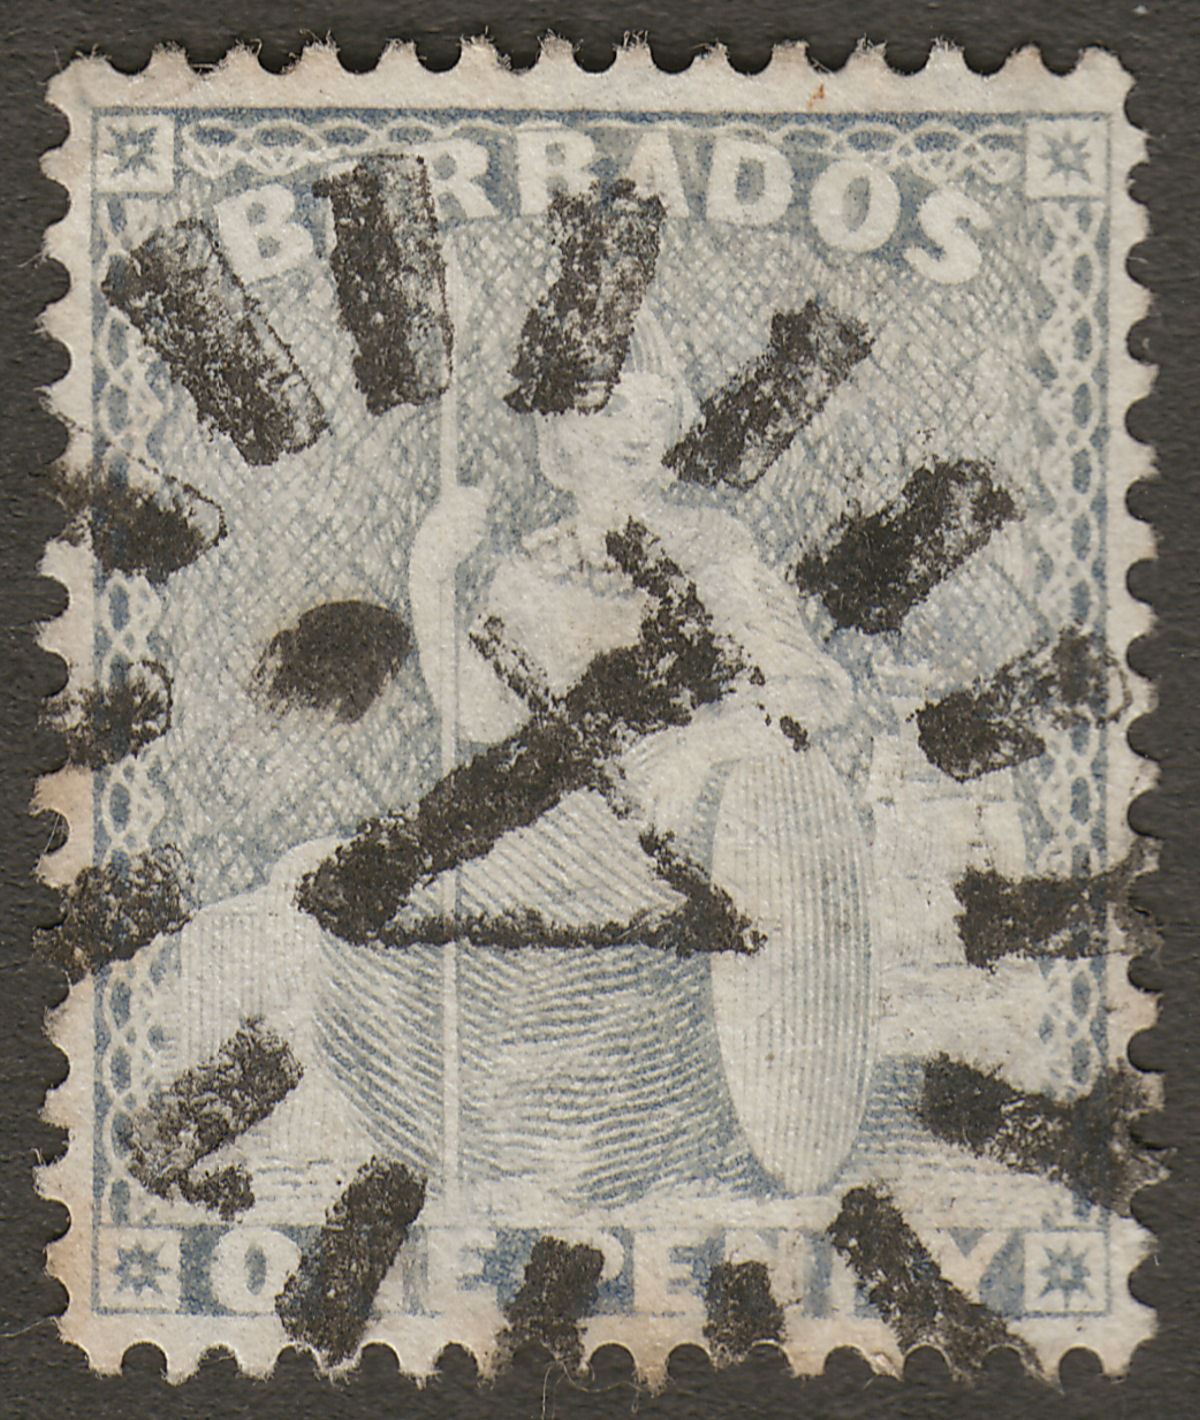 Barbados 1875 QV Britannia 1d Grey-Blue perf 14 Used with Numeral 4 Postmark